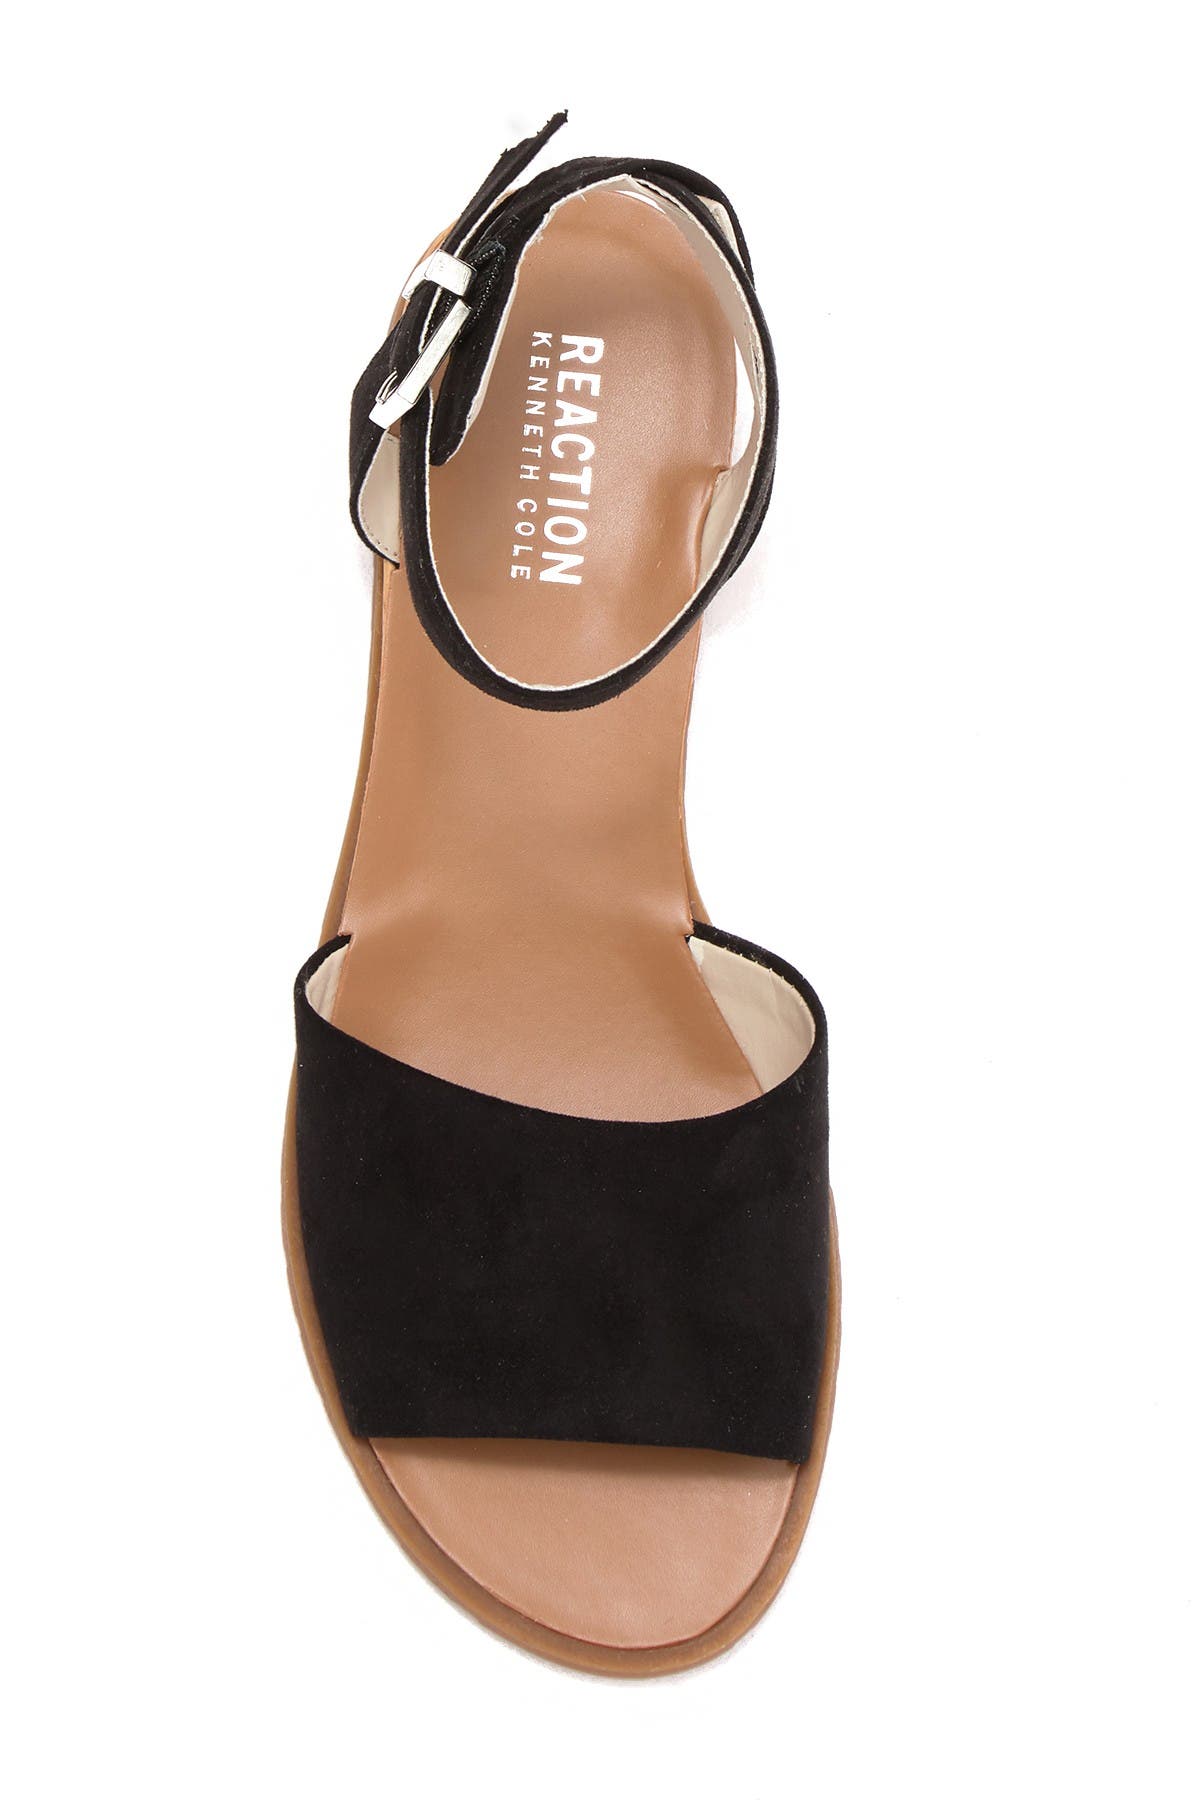 kenneth cole reaction jolly suede sandal